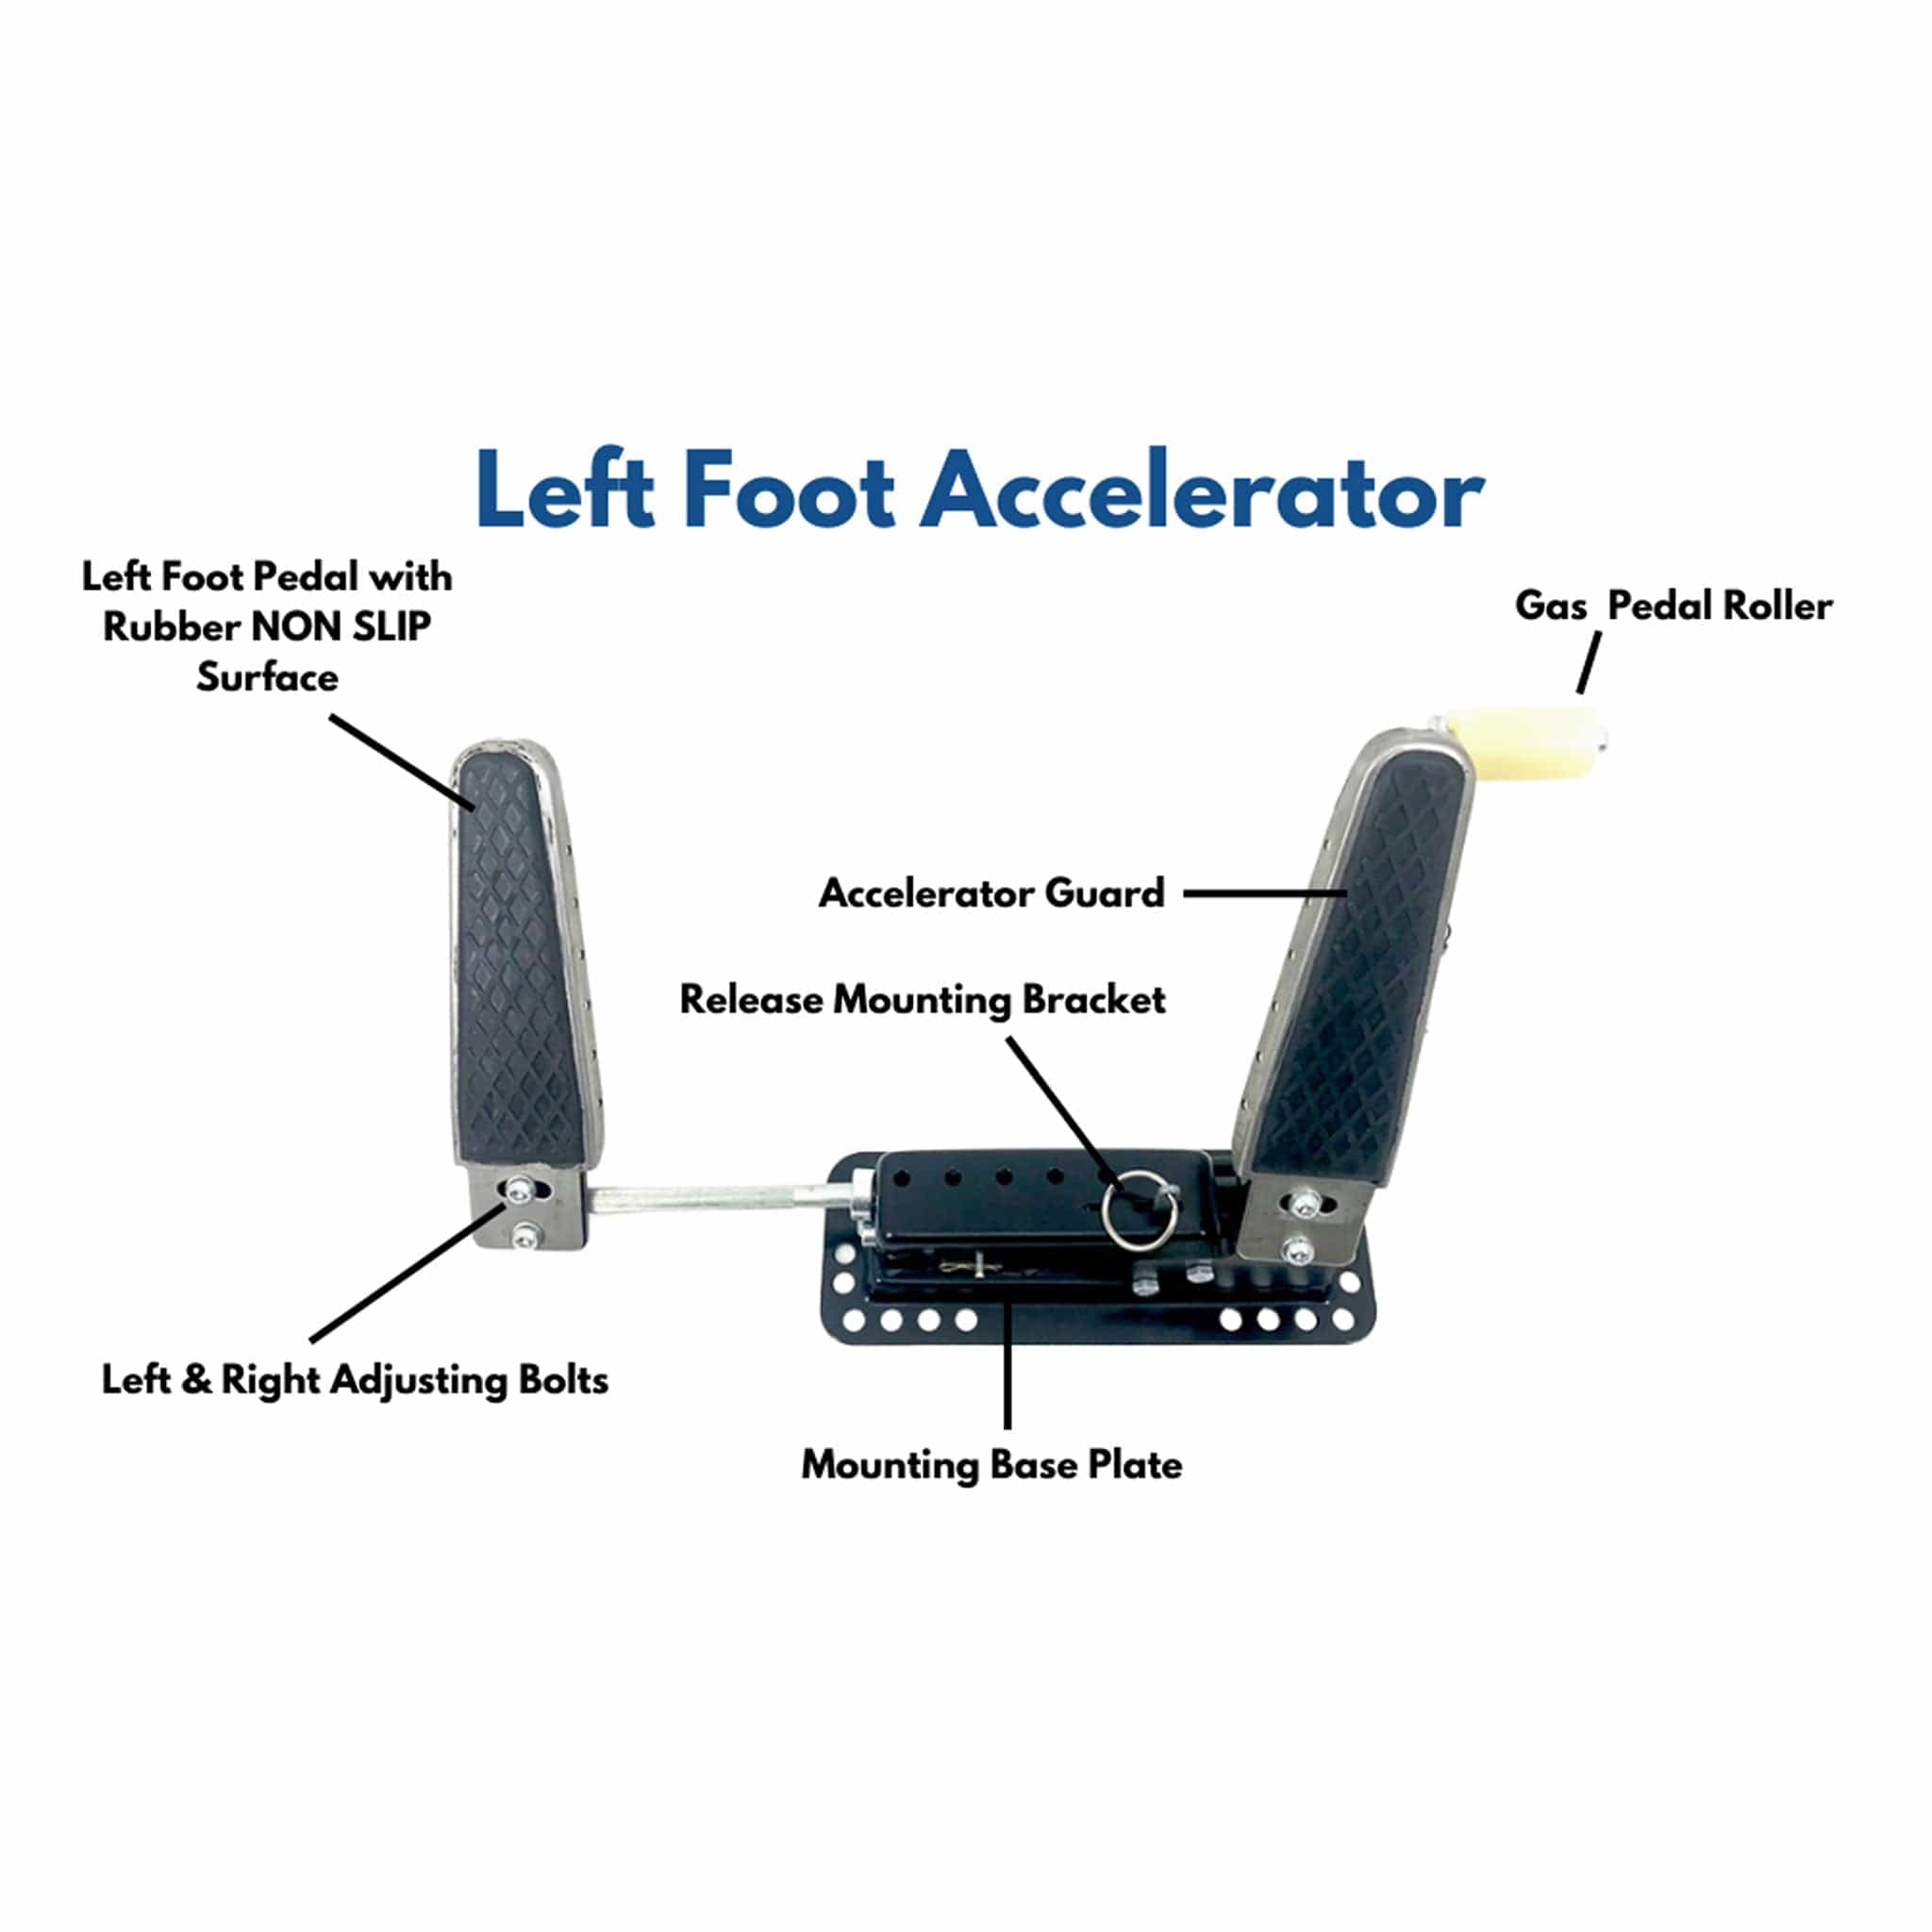 Left Foot Pedal Accelerator for Disabled Drivers - Free Shipping